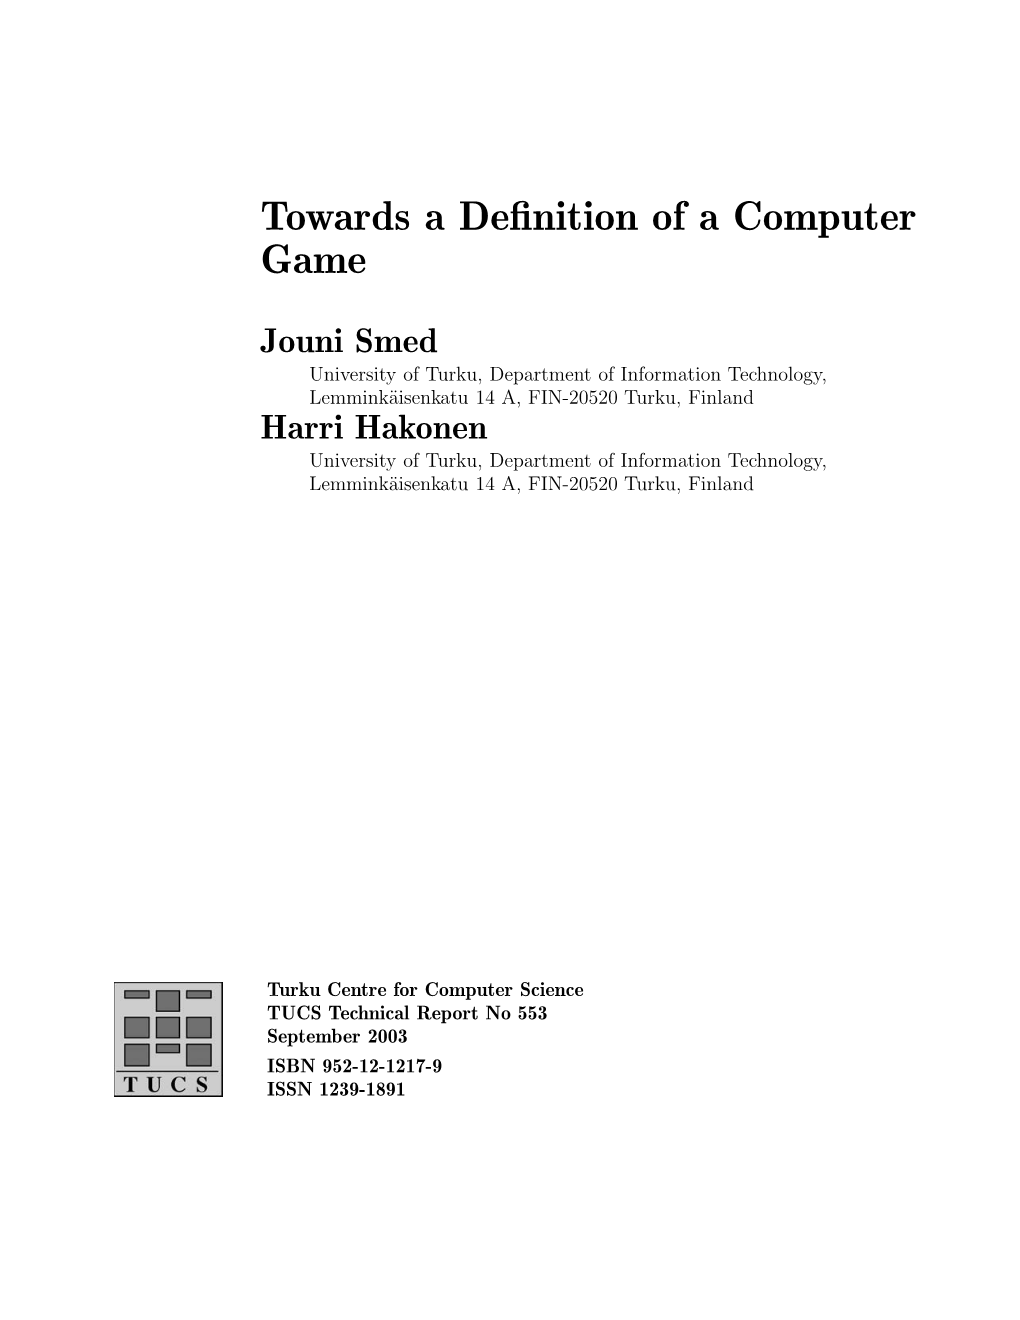 Towards a Definition of a Computer Game